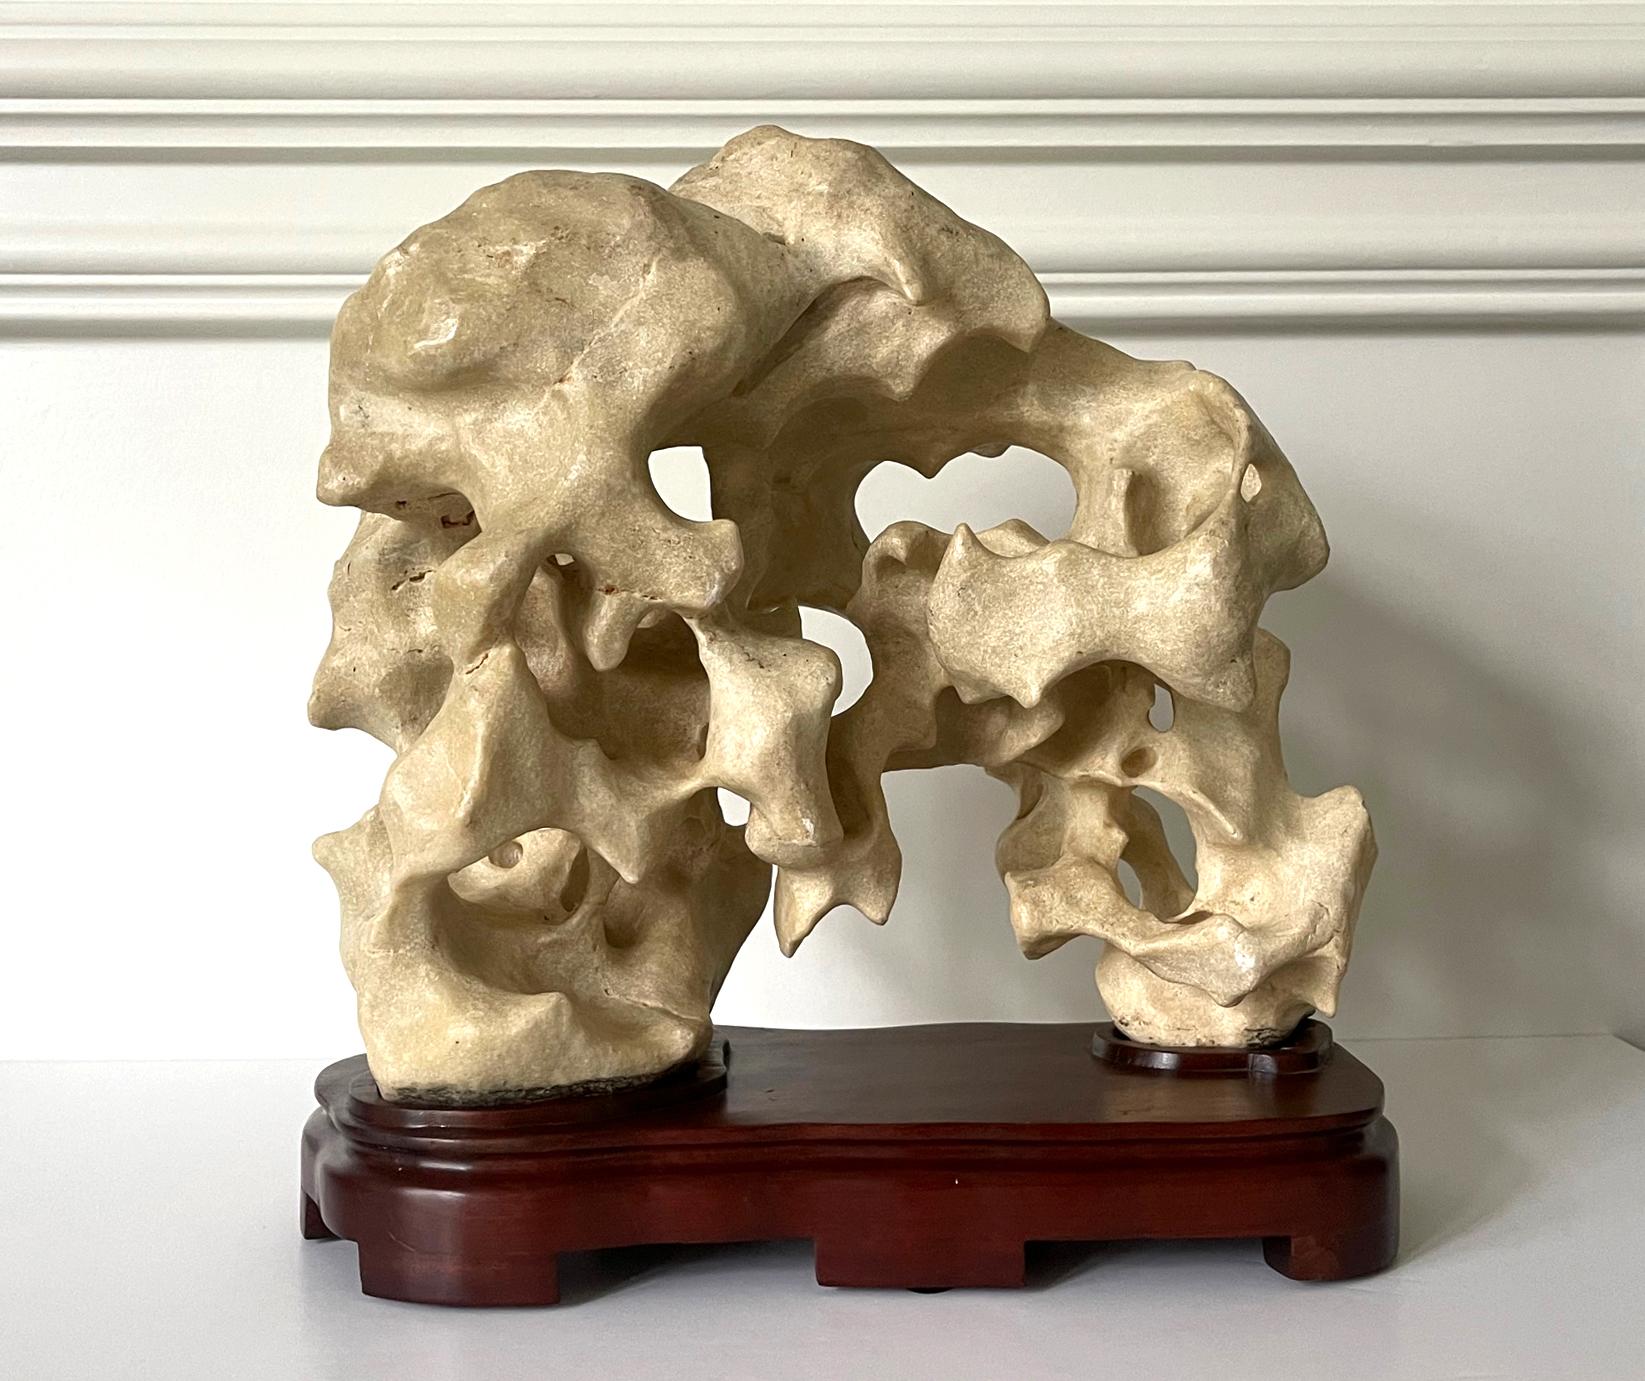 A Taihu scholar rock in a horizonal bridged form balanced on a custom wood stand. The stone, in a nearly pure soft white color, display a well-weathered surface with some patina. The surface features various natural geological characters and